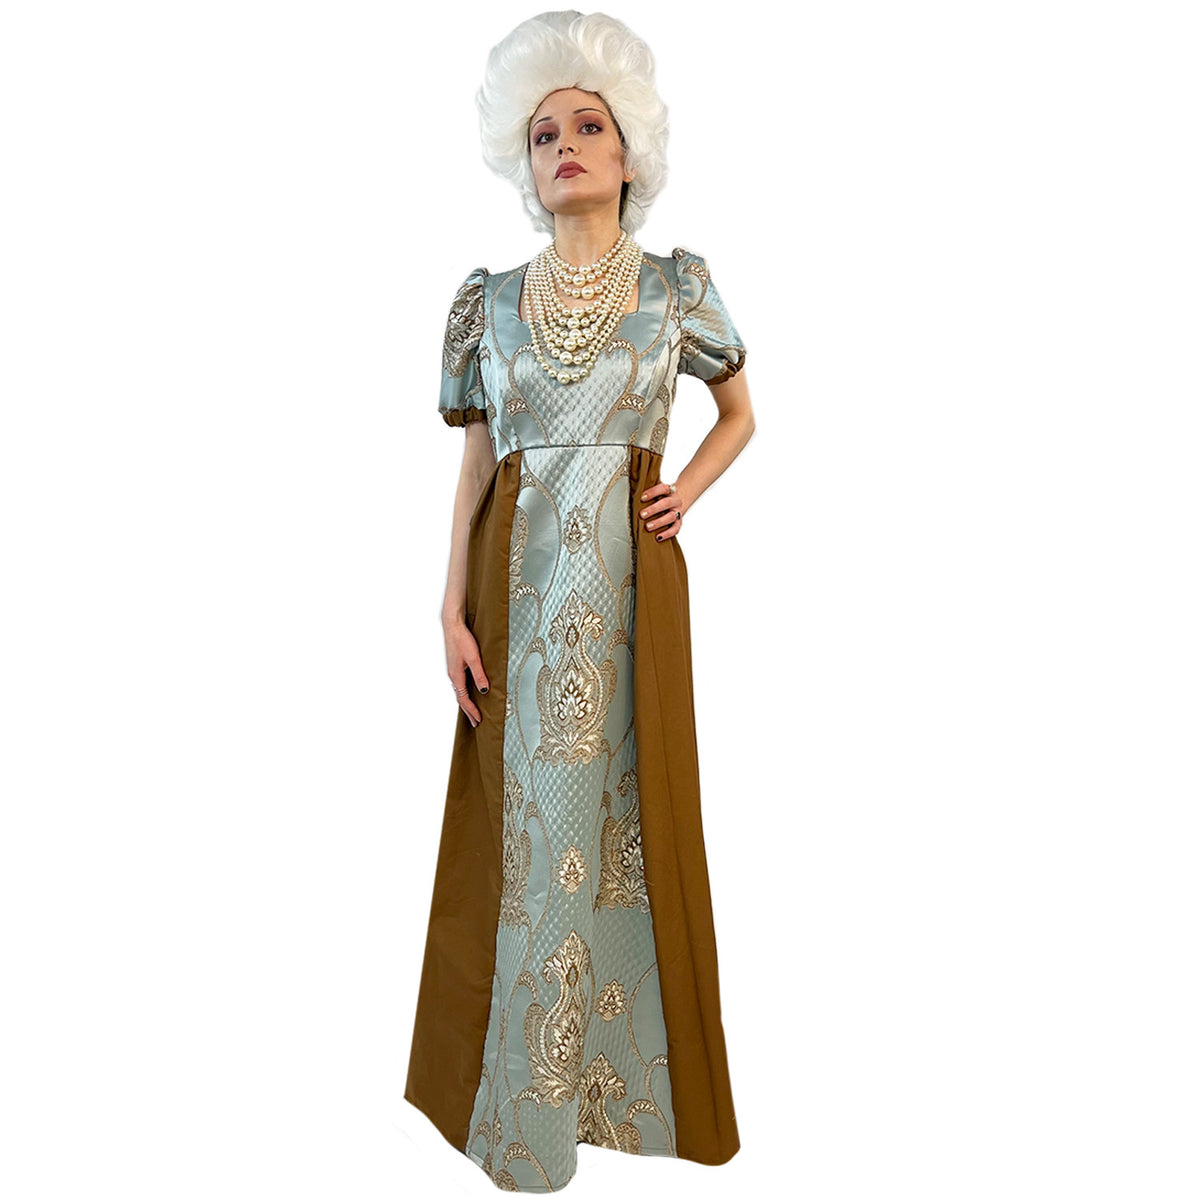 Regency Blue and Brown Women's Dress Adult Costume